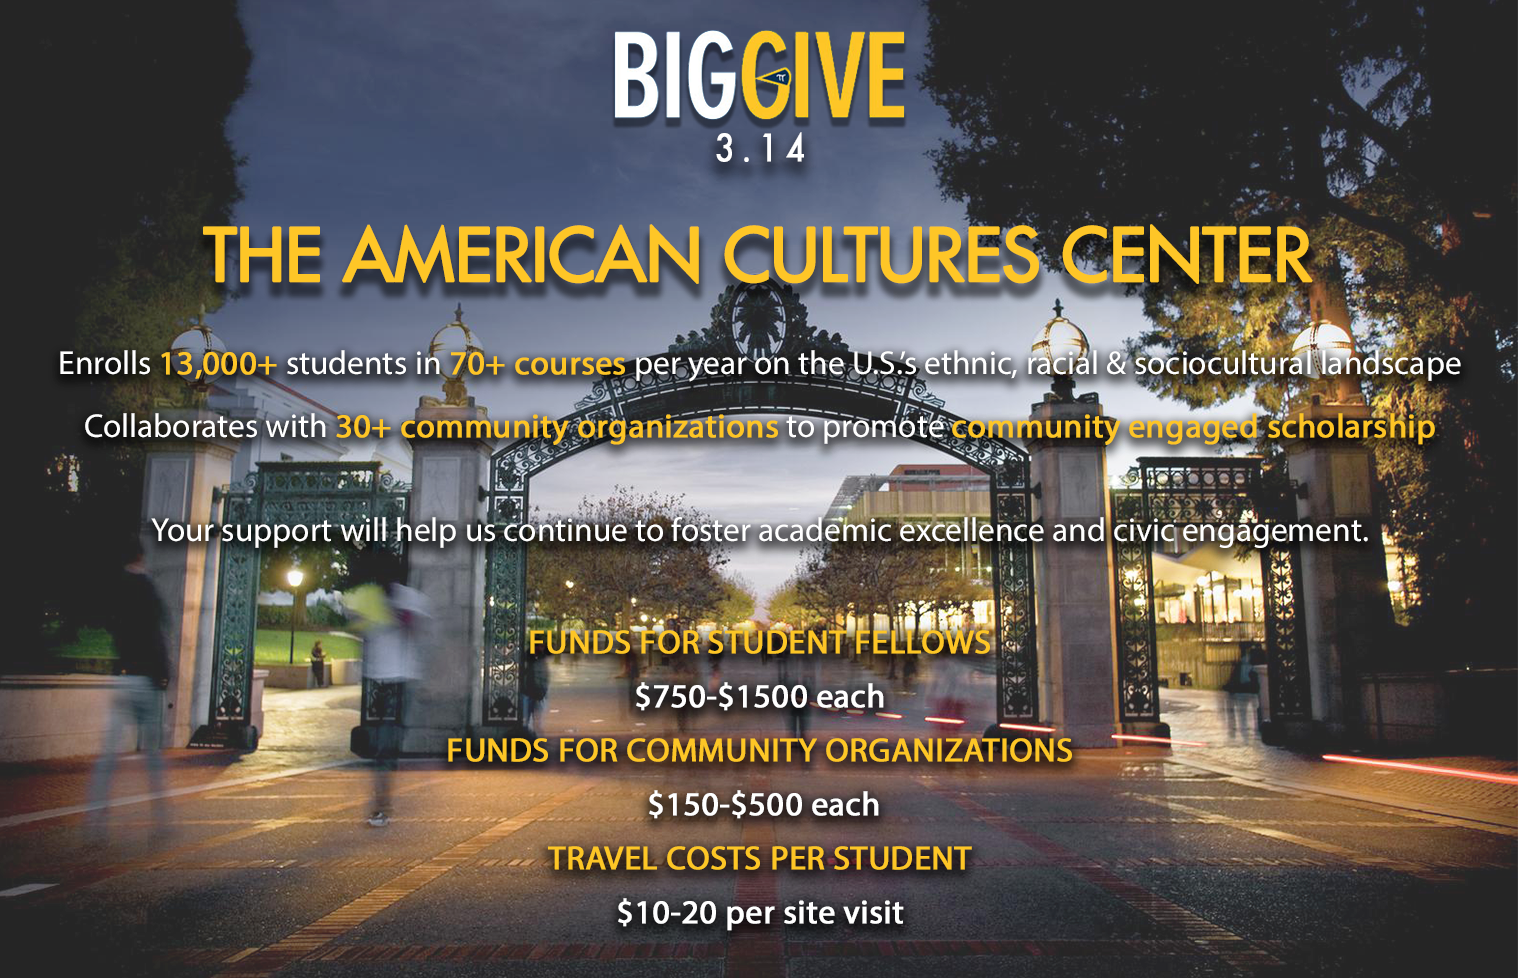 Big Give, March 14th, 2019 The American Cultures Center